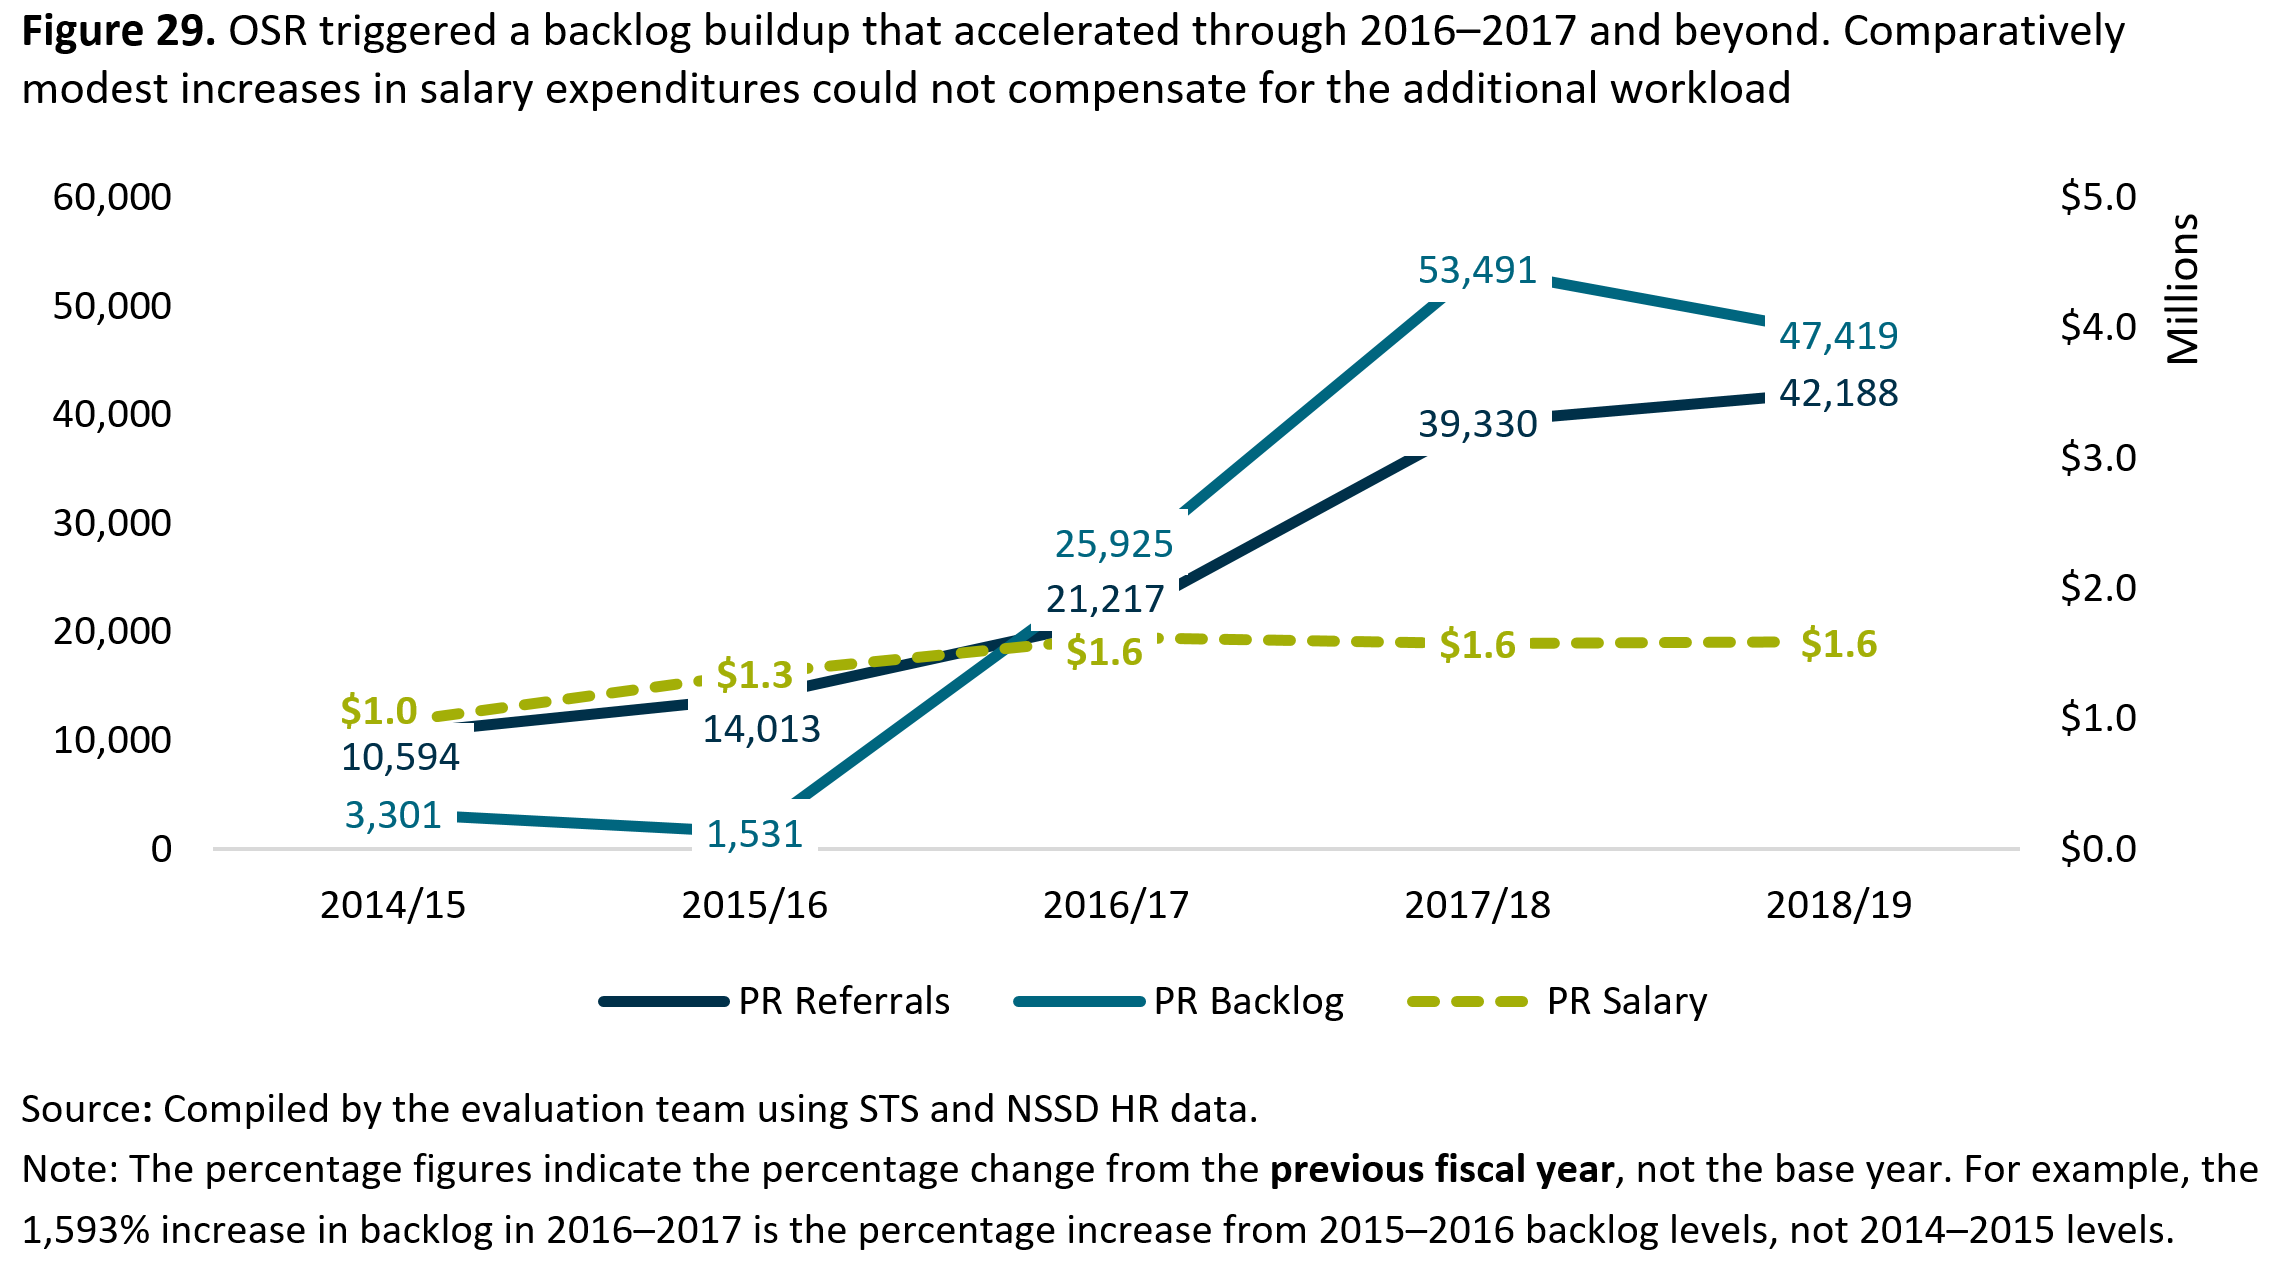 Figure 29. <abbr>OSR</abbr> triggered a backlog buildup that accelerated through 2016 to 2017 and beyond. Comparatively modest increases in salary expenditures could not compensate for the additional workload